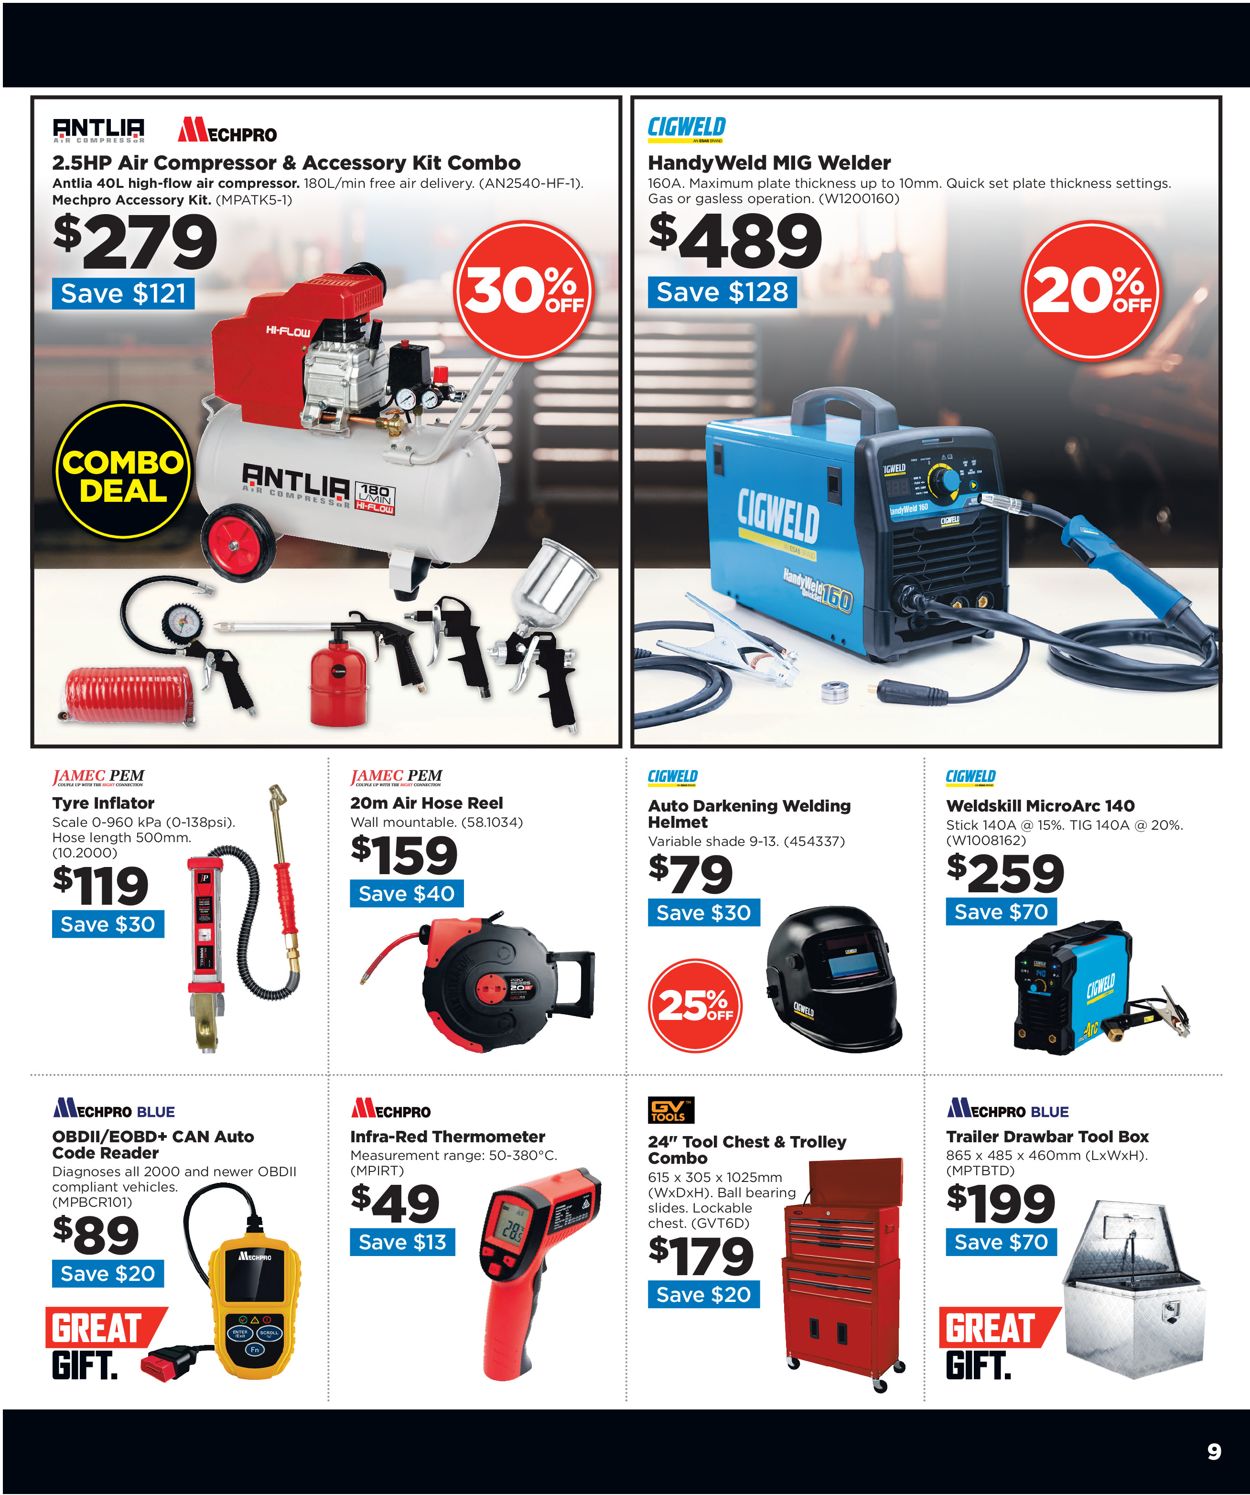 Repco Catalogue from 24/08/2022